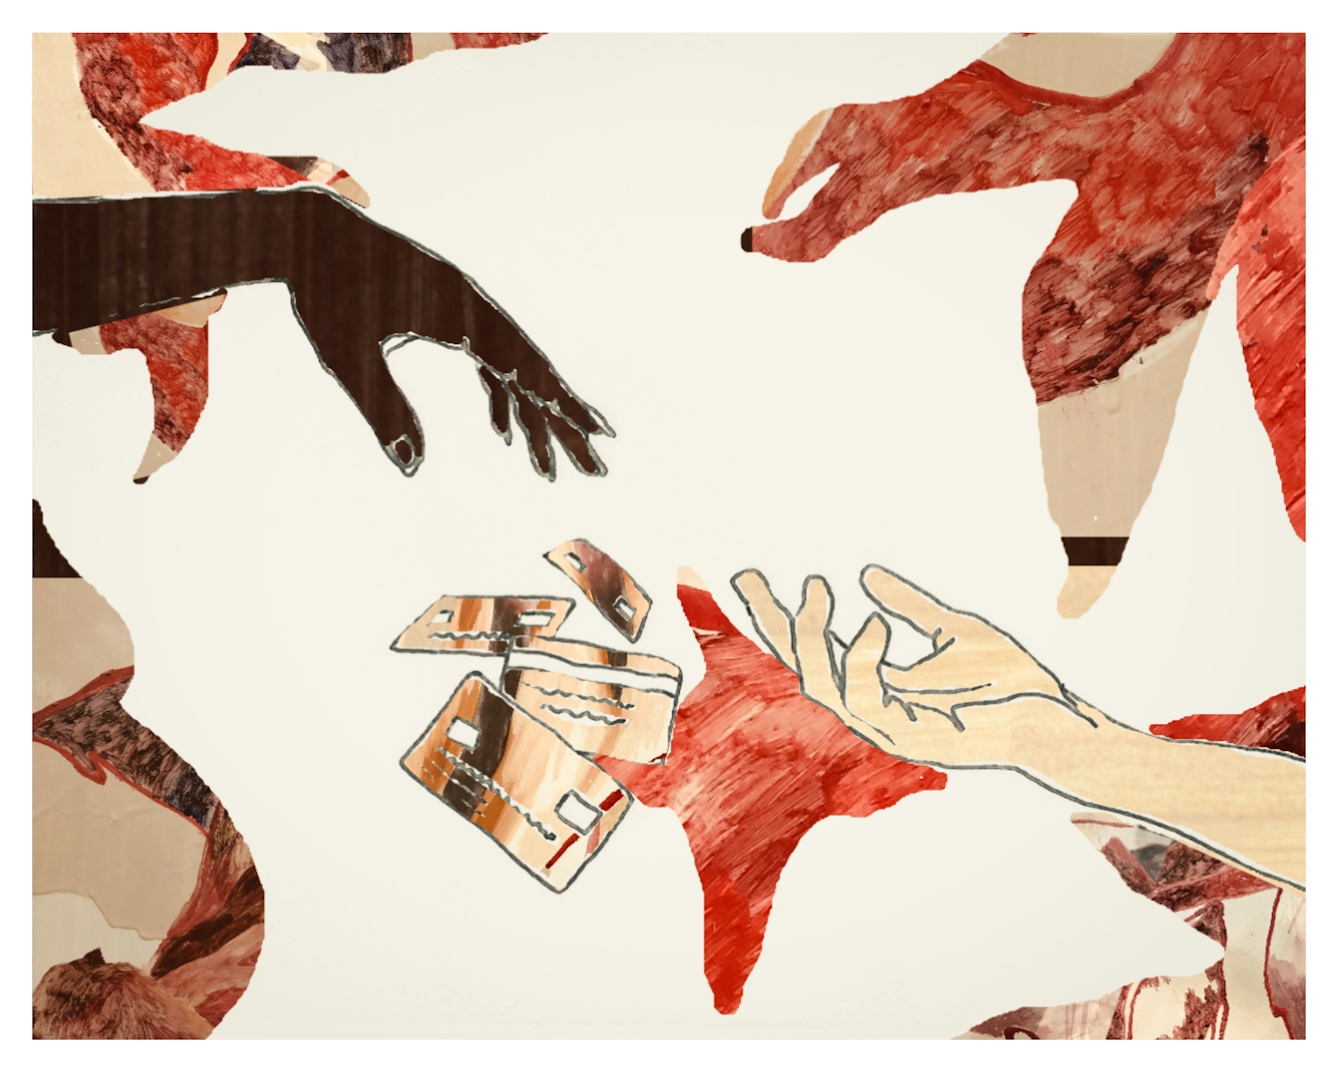 Digital artwork made up of collage elements, line drawing and textured patterns. The artwork depicts two hands reaching out towards each other, one is a dark skin tone and the other lighter. Falling between their fingers are 4 credit cards which seem to be tumbling through the air. Surrounding the hands are collaged textured shapes.The tones of the artwork are creams, rusts, browns and reds.